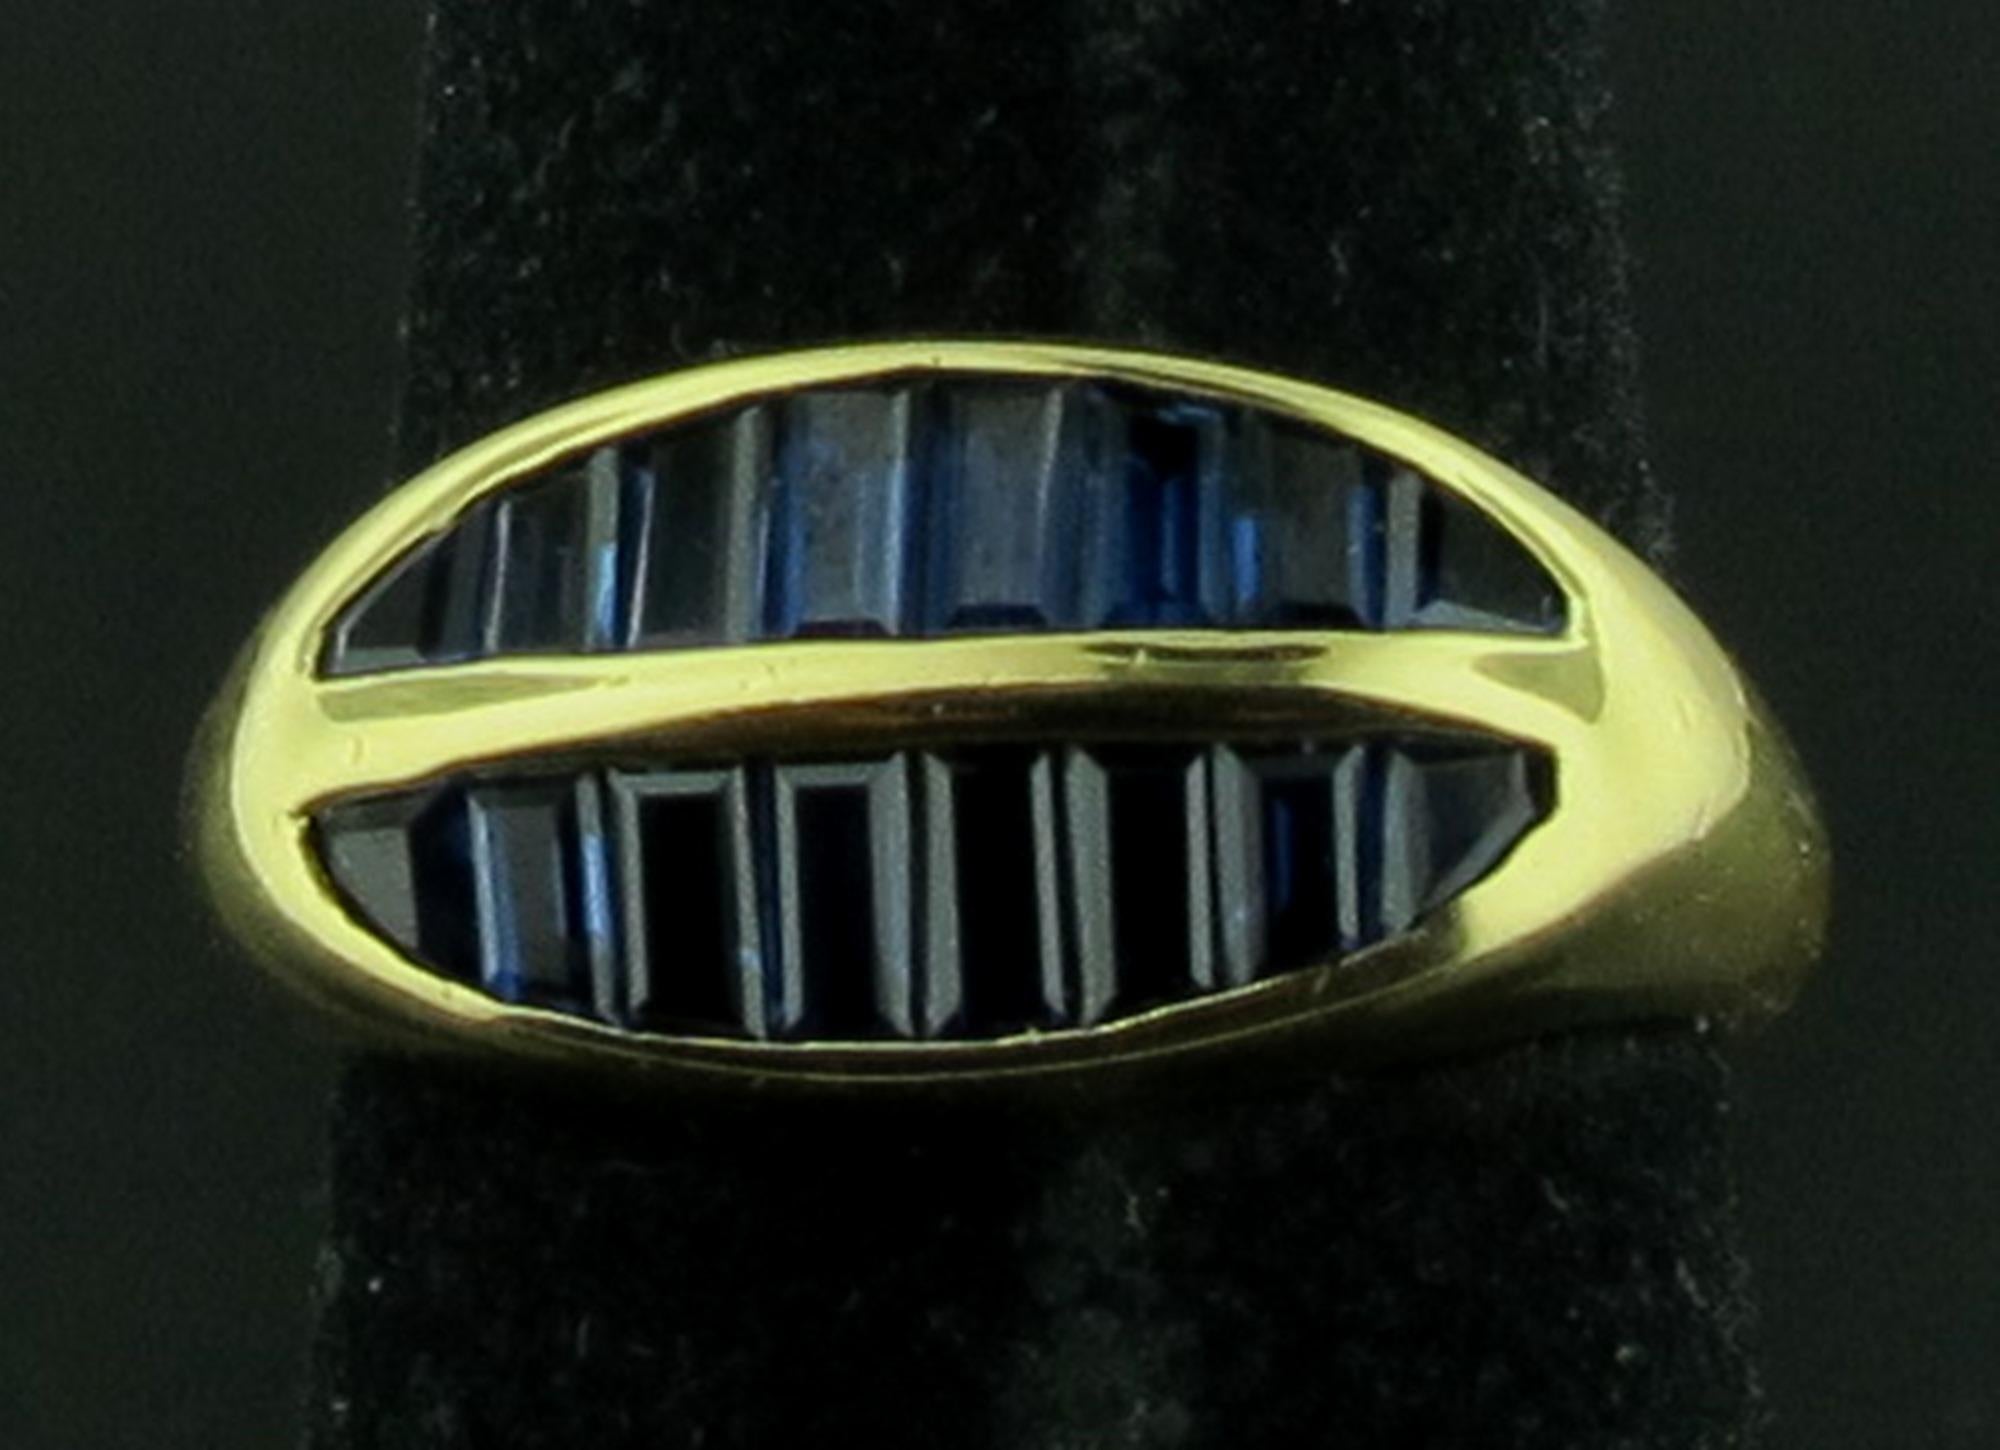 Set in 18 karat yellow gold are 16 baguette cut blue Sapphires.  Sapphire weight is 1.25 carats.  Gold weight is 6 grams.  Ring size is 6.